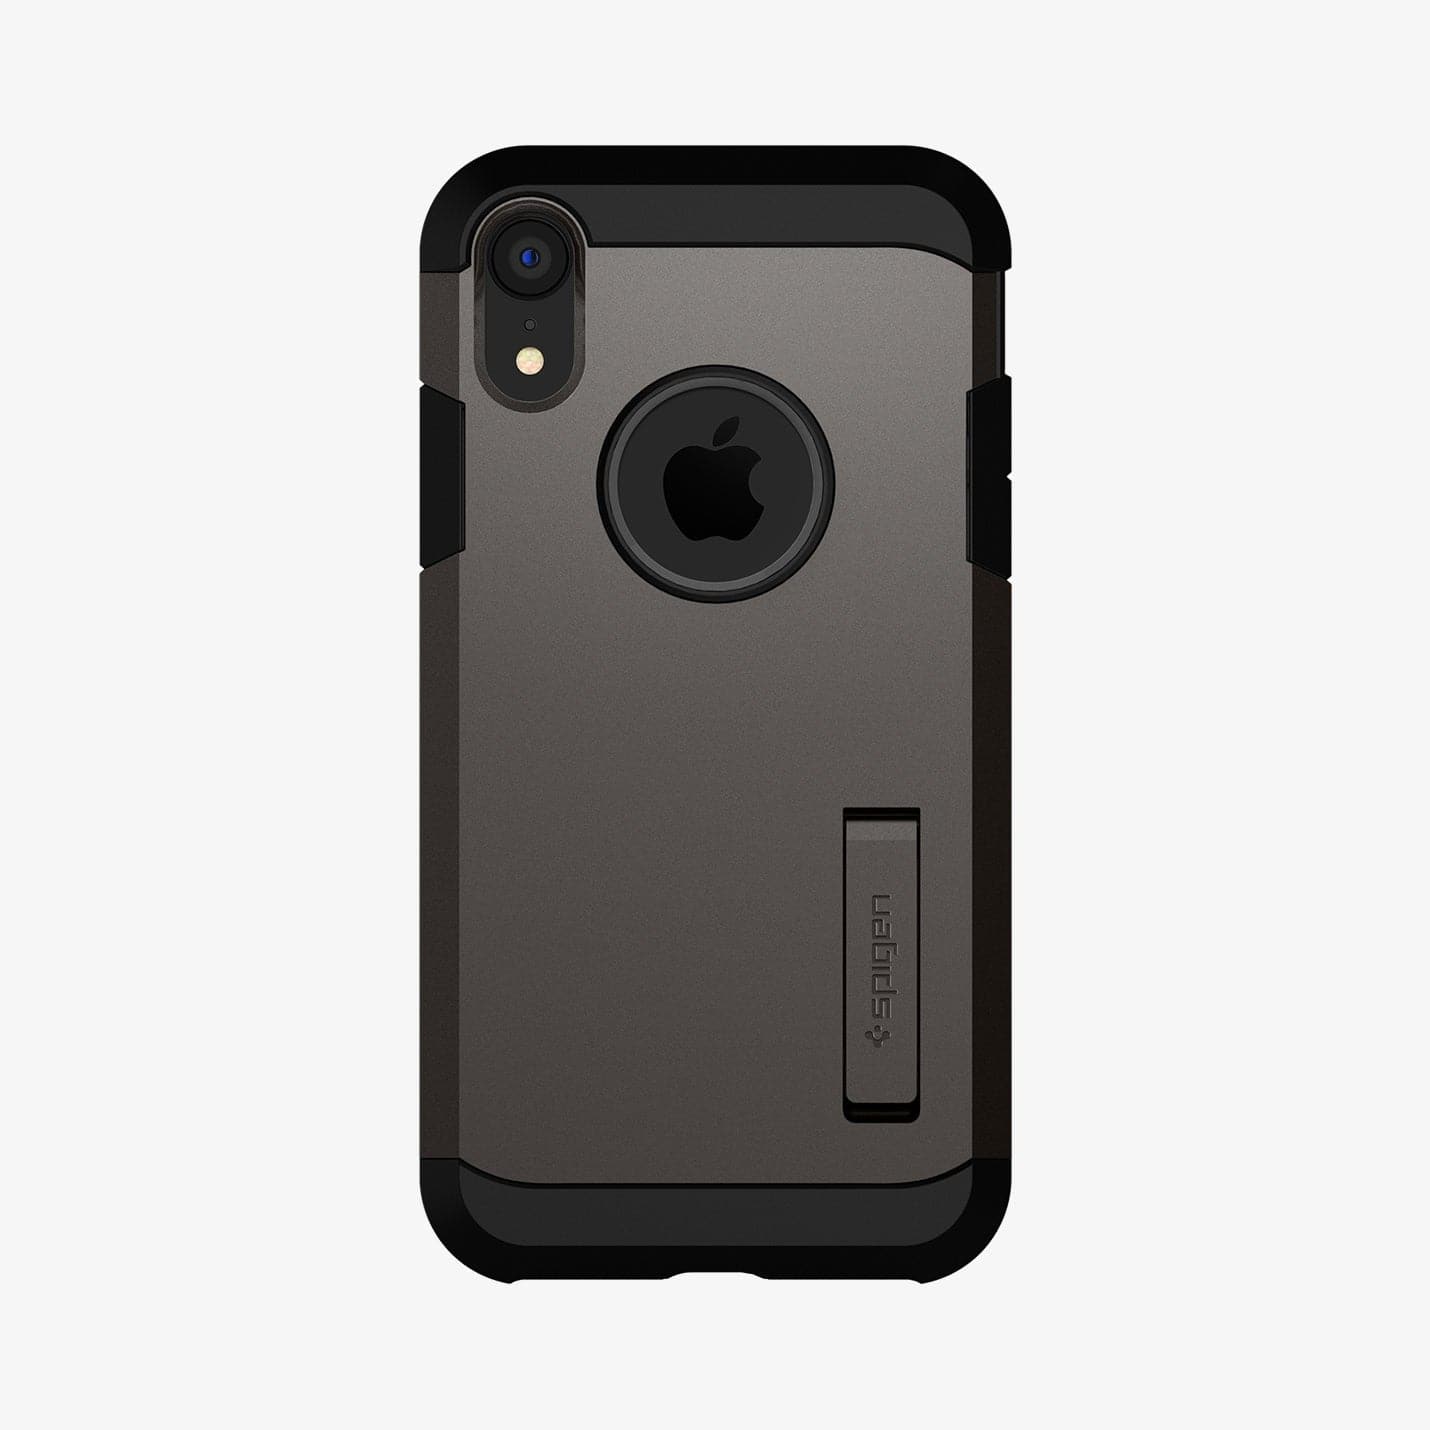 064CS24877 - iPhone XR Case Tough Armor in gunmetal showing the back